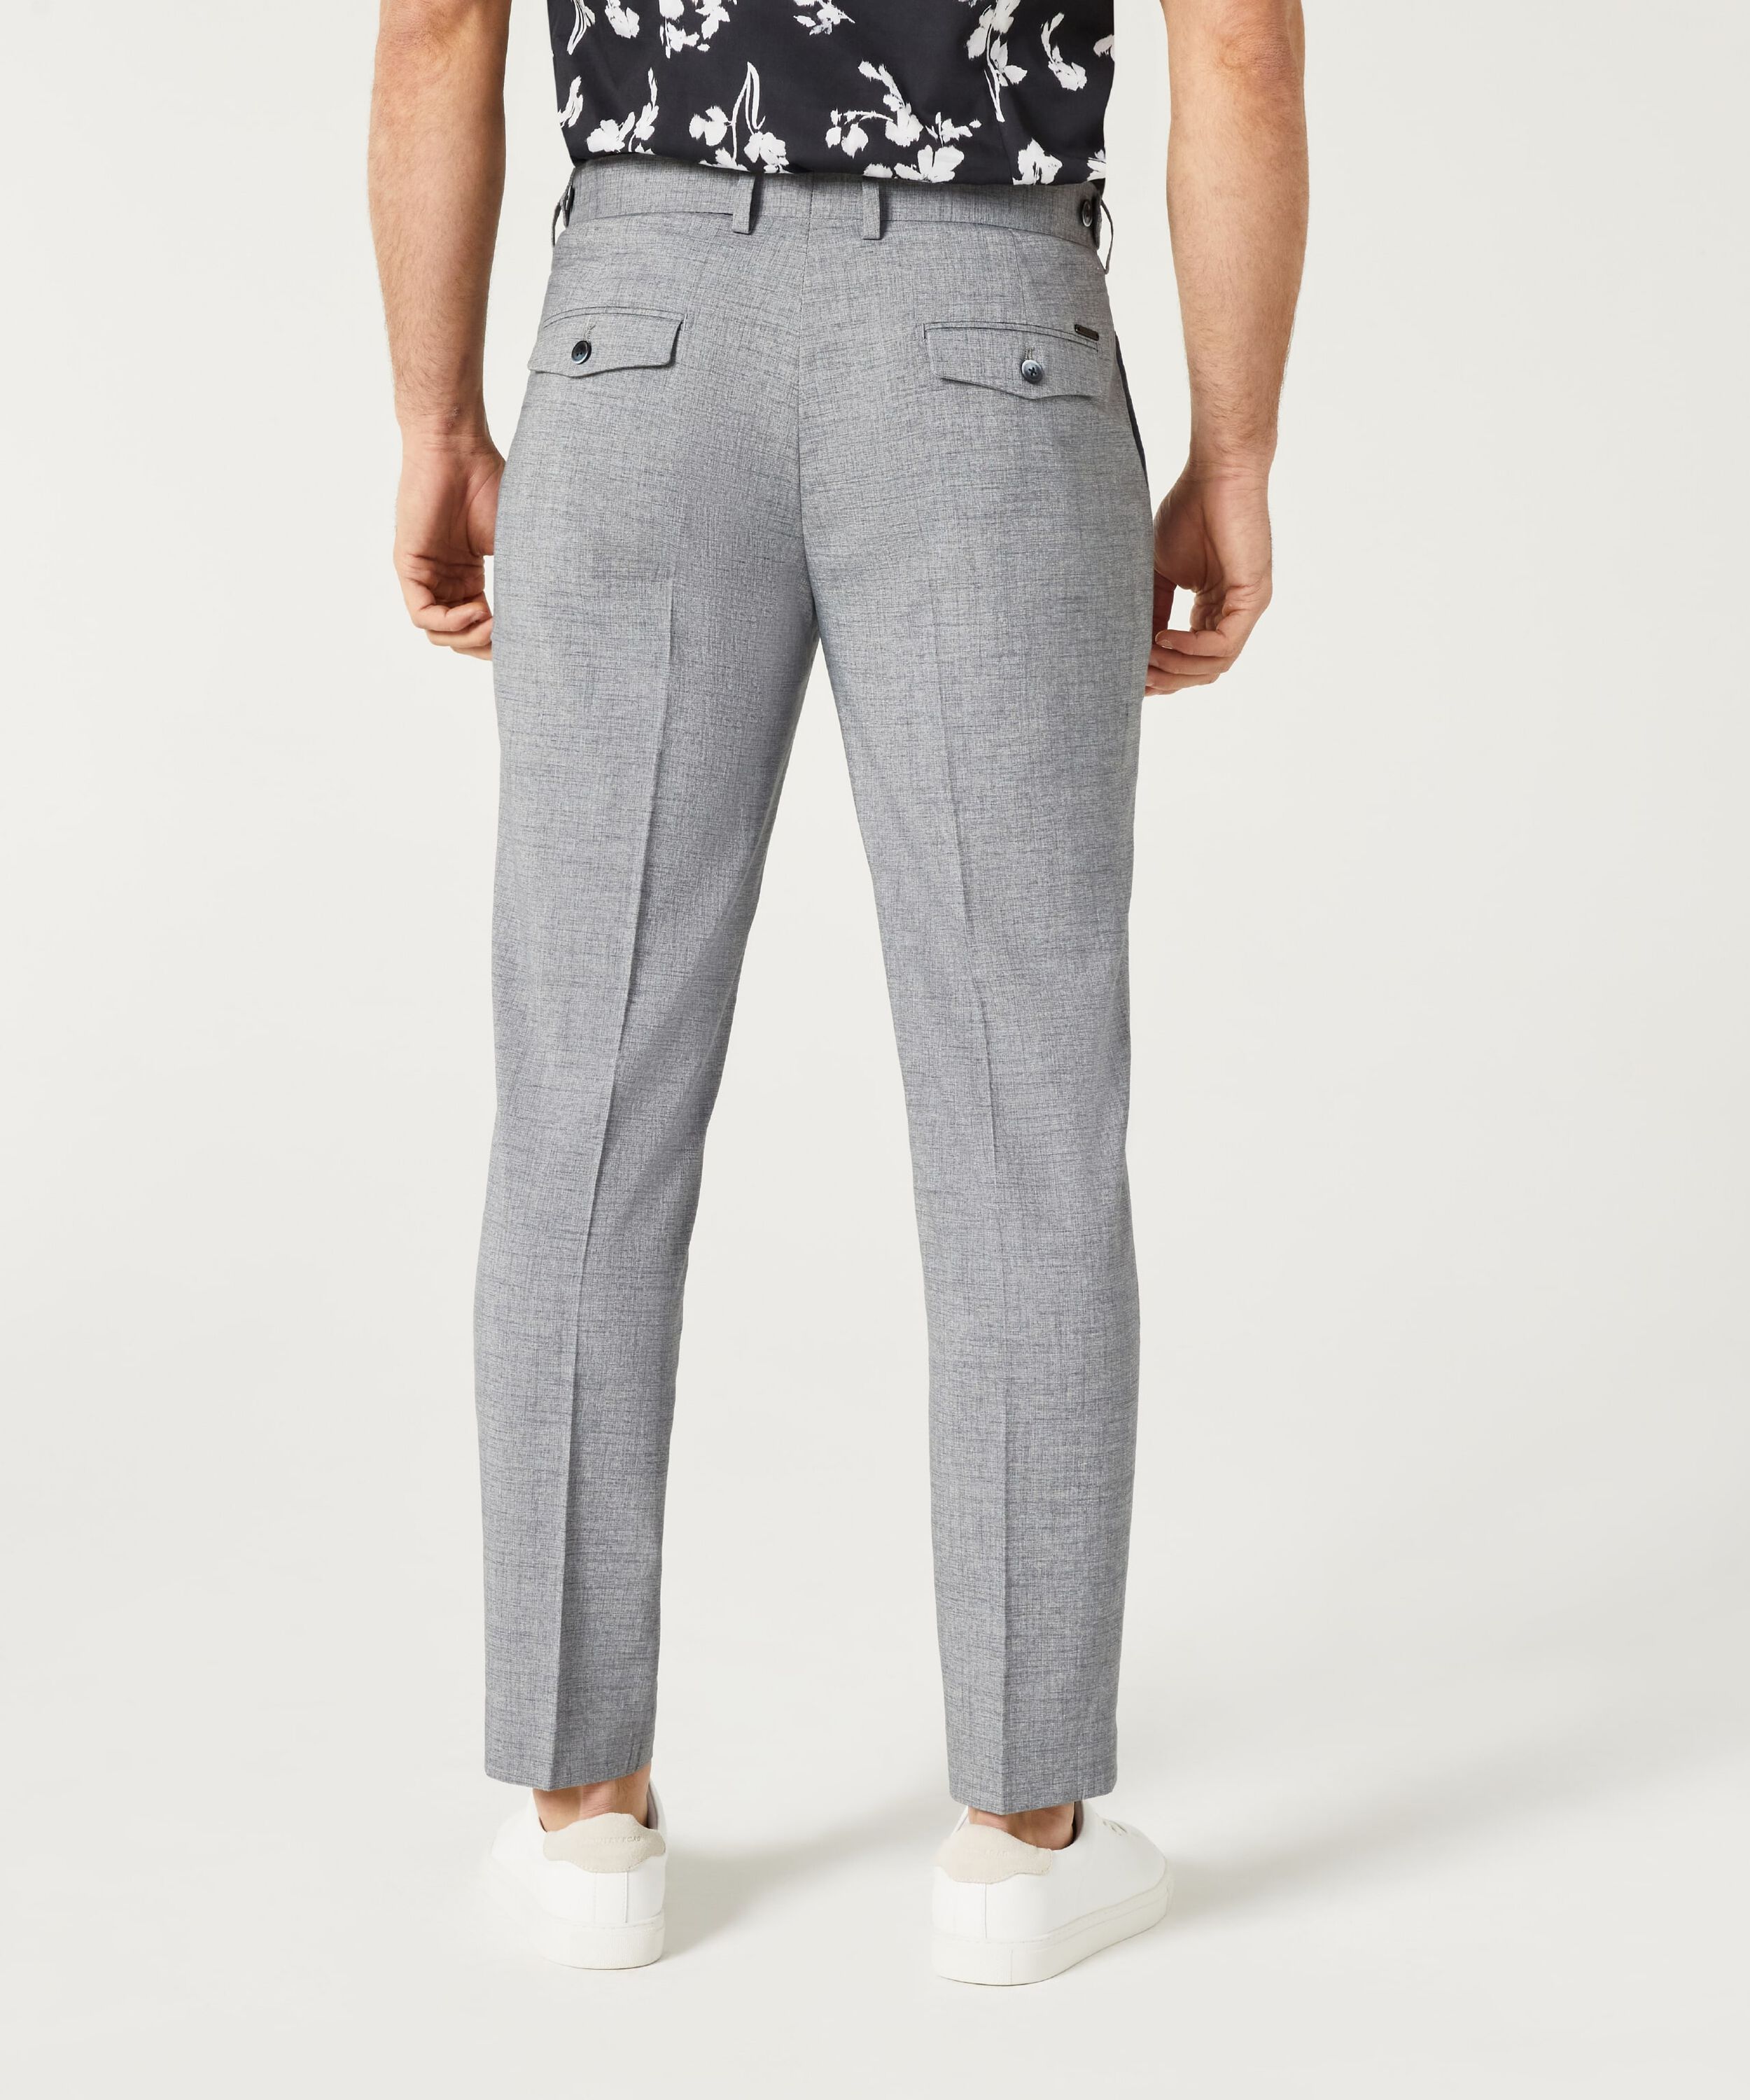 Relaxed Slim Stretch Pleated Tailored Pant - Light Grey